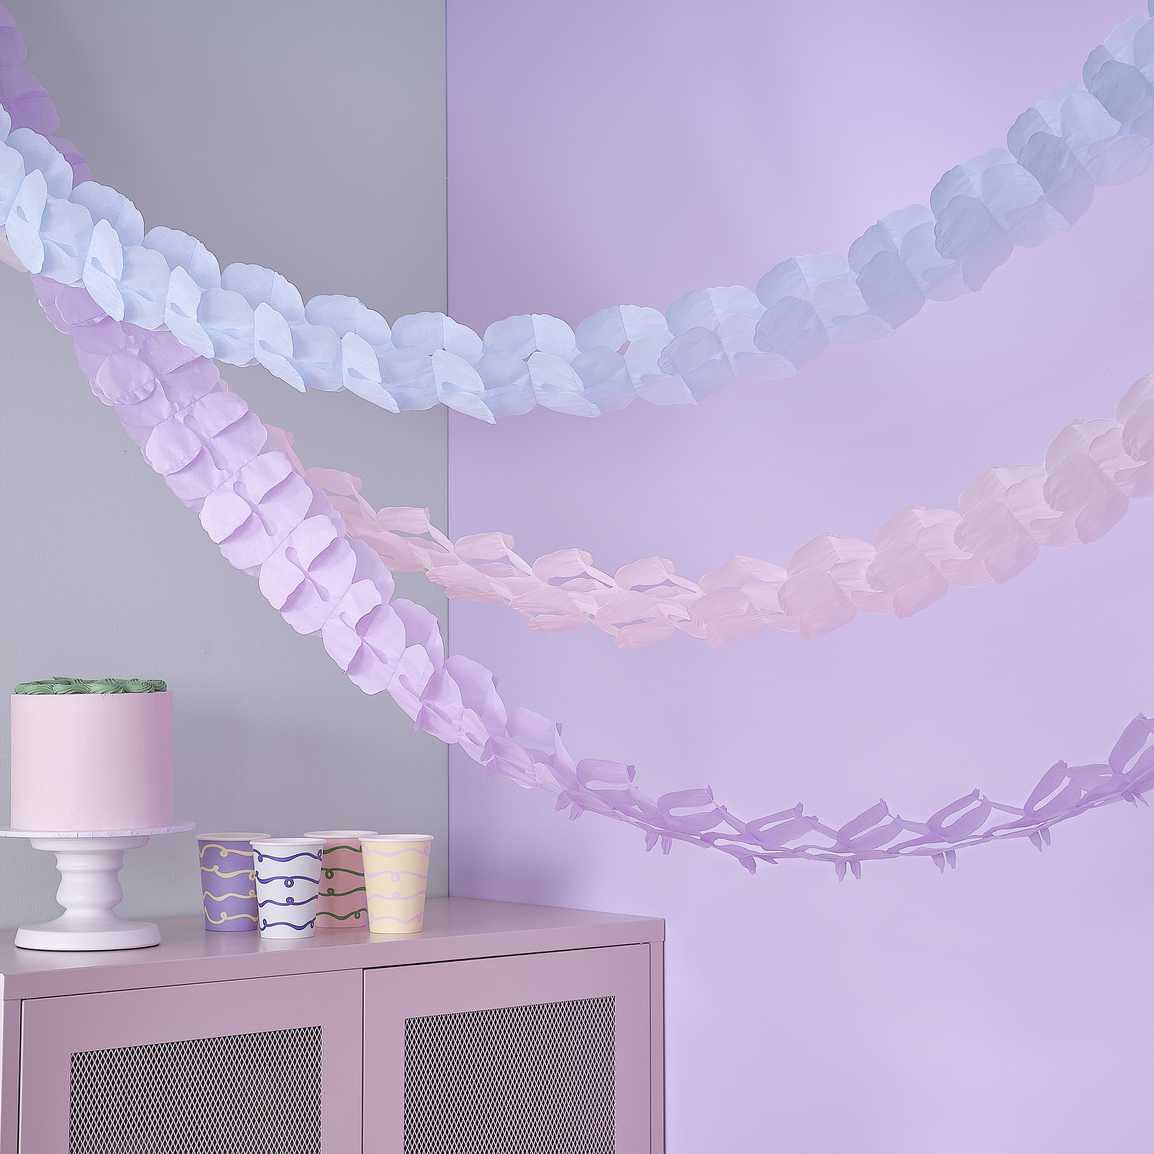 Bring the pastel theme to life with these tissue paper garland hanging decorations from the Pastel Wave collection.

l8r.it/ONPI

#pastelwave #paperdecorations #birthdaydecorations #partysupplies #pasteldecorations #partydecor #partyplanner #partyhost #birthdayparty